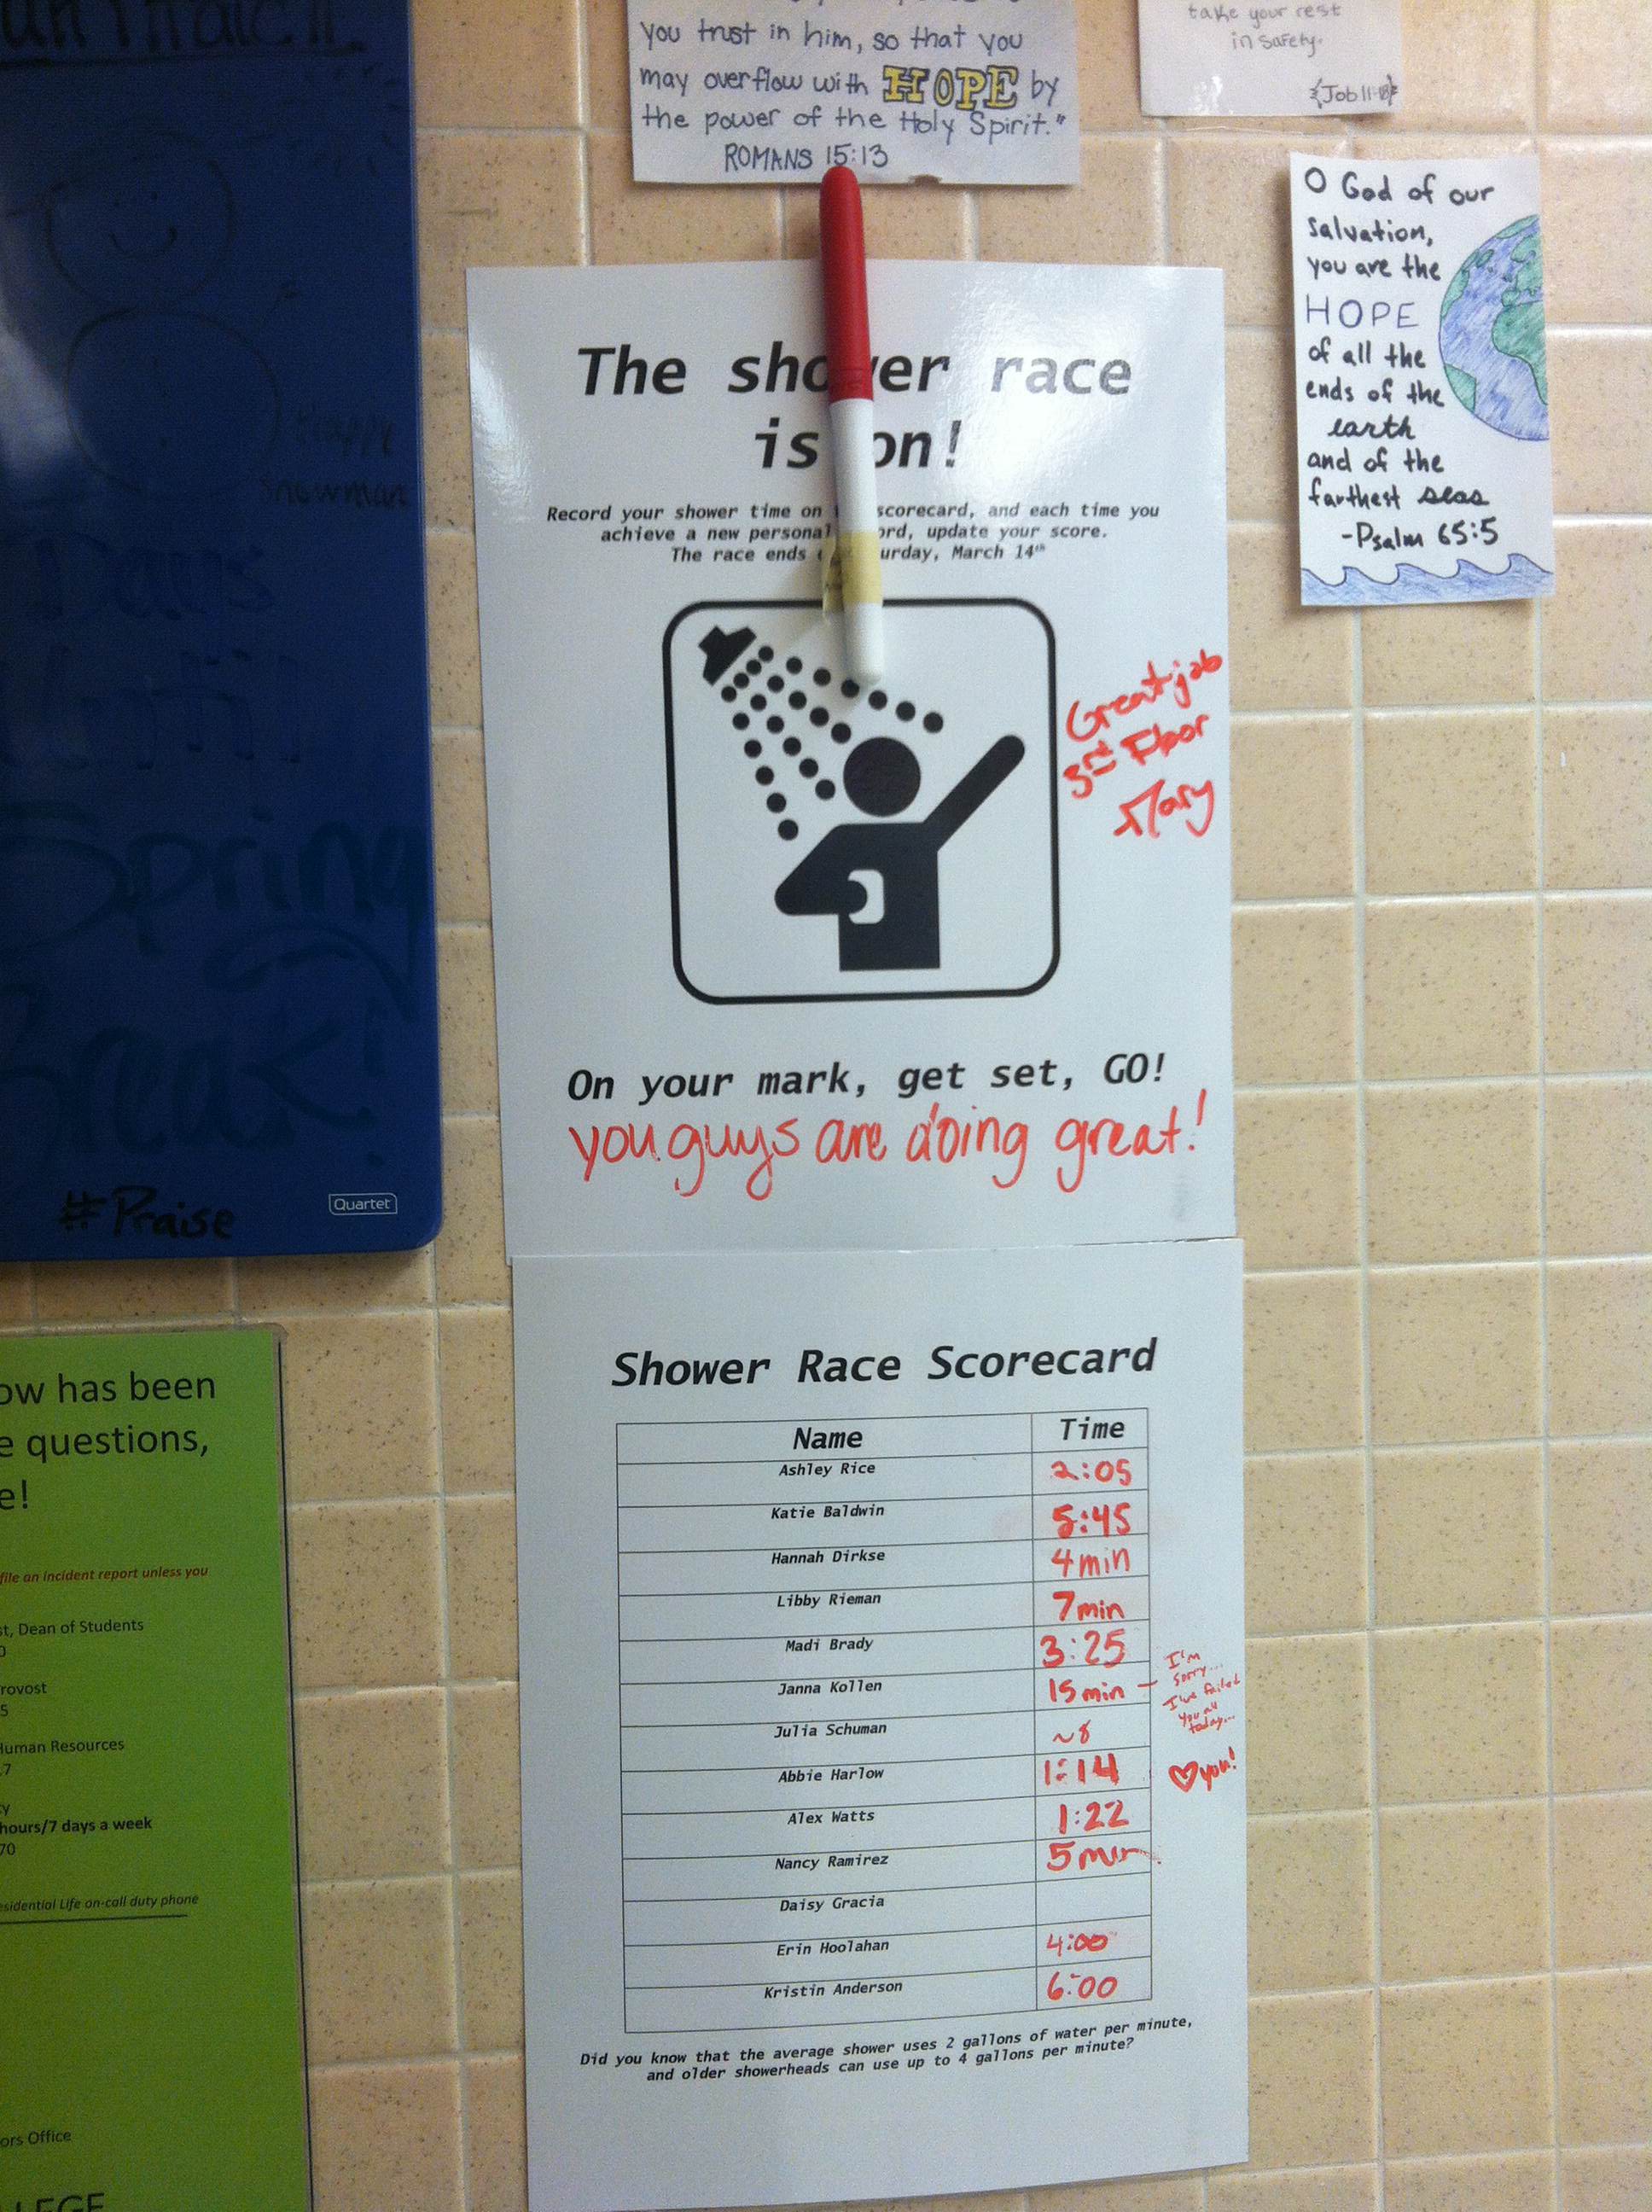 The scoreboard for The Shower Race.Our floor is home to the Shortest Shower taker in Van Vleck--Abbie Harlow